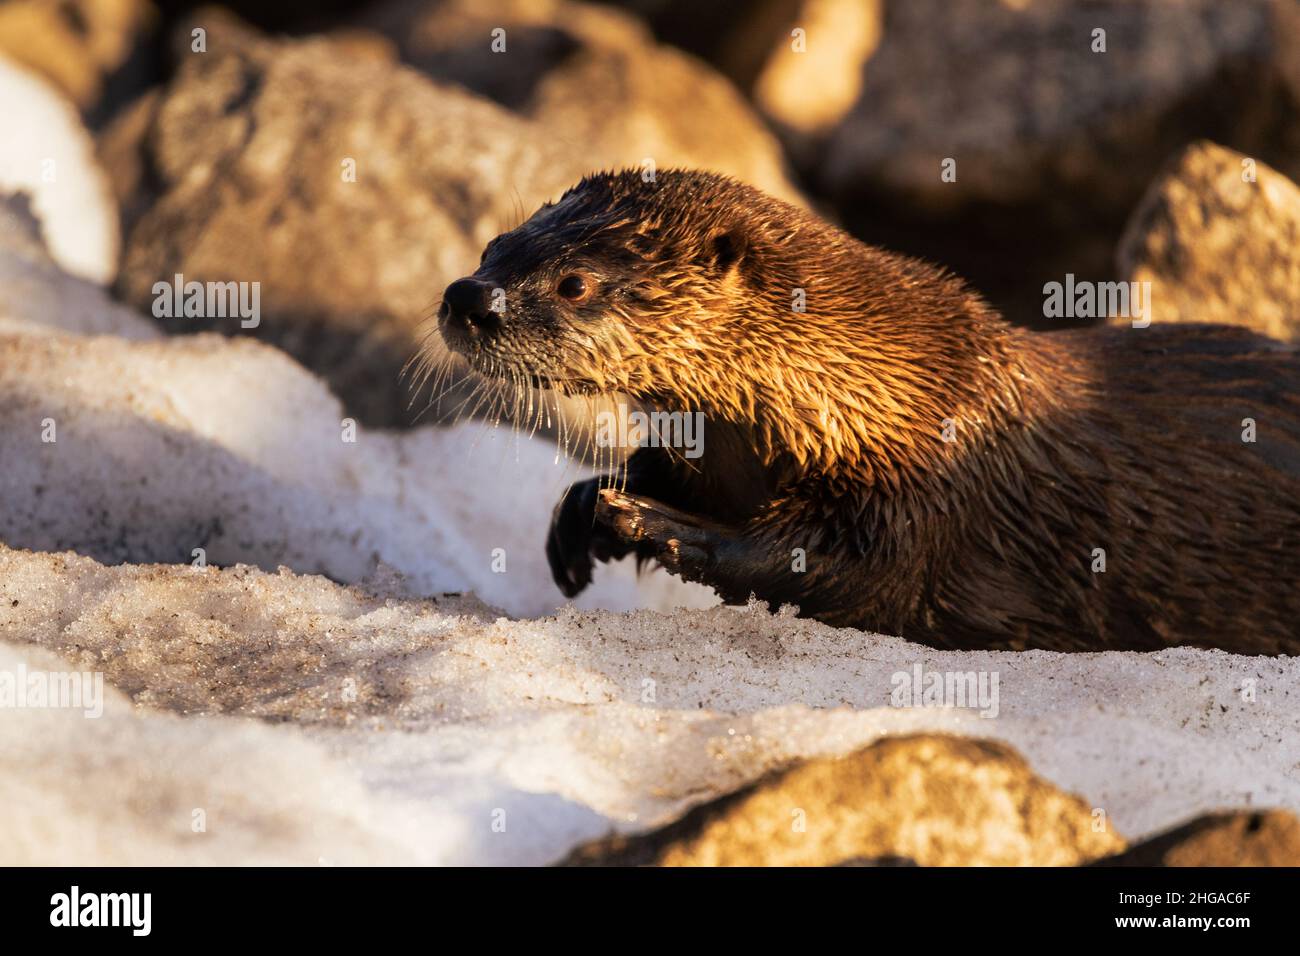 River otter climbing the bank at Lake Almanor in Plumas County, California, USA.  Animal is crawling through snow on a winter day. Stock Photo